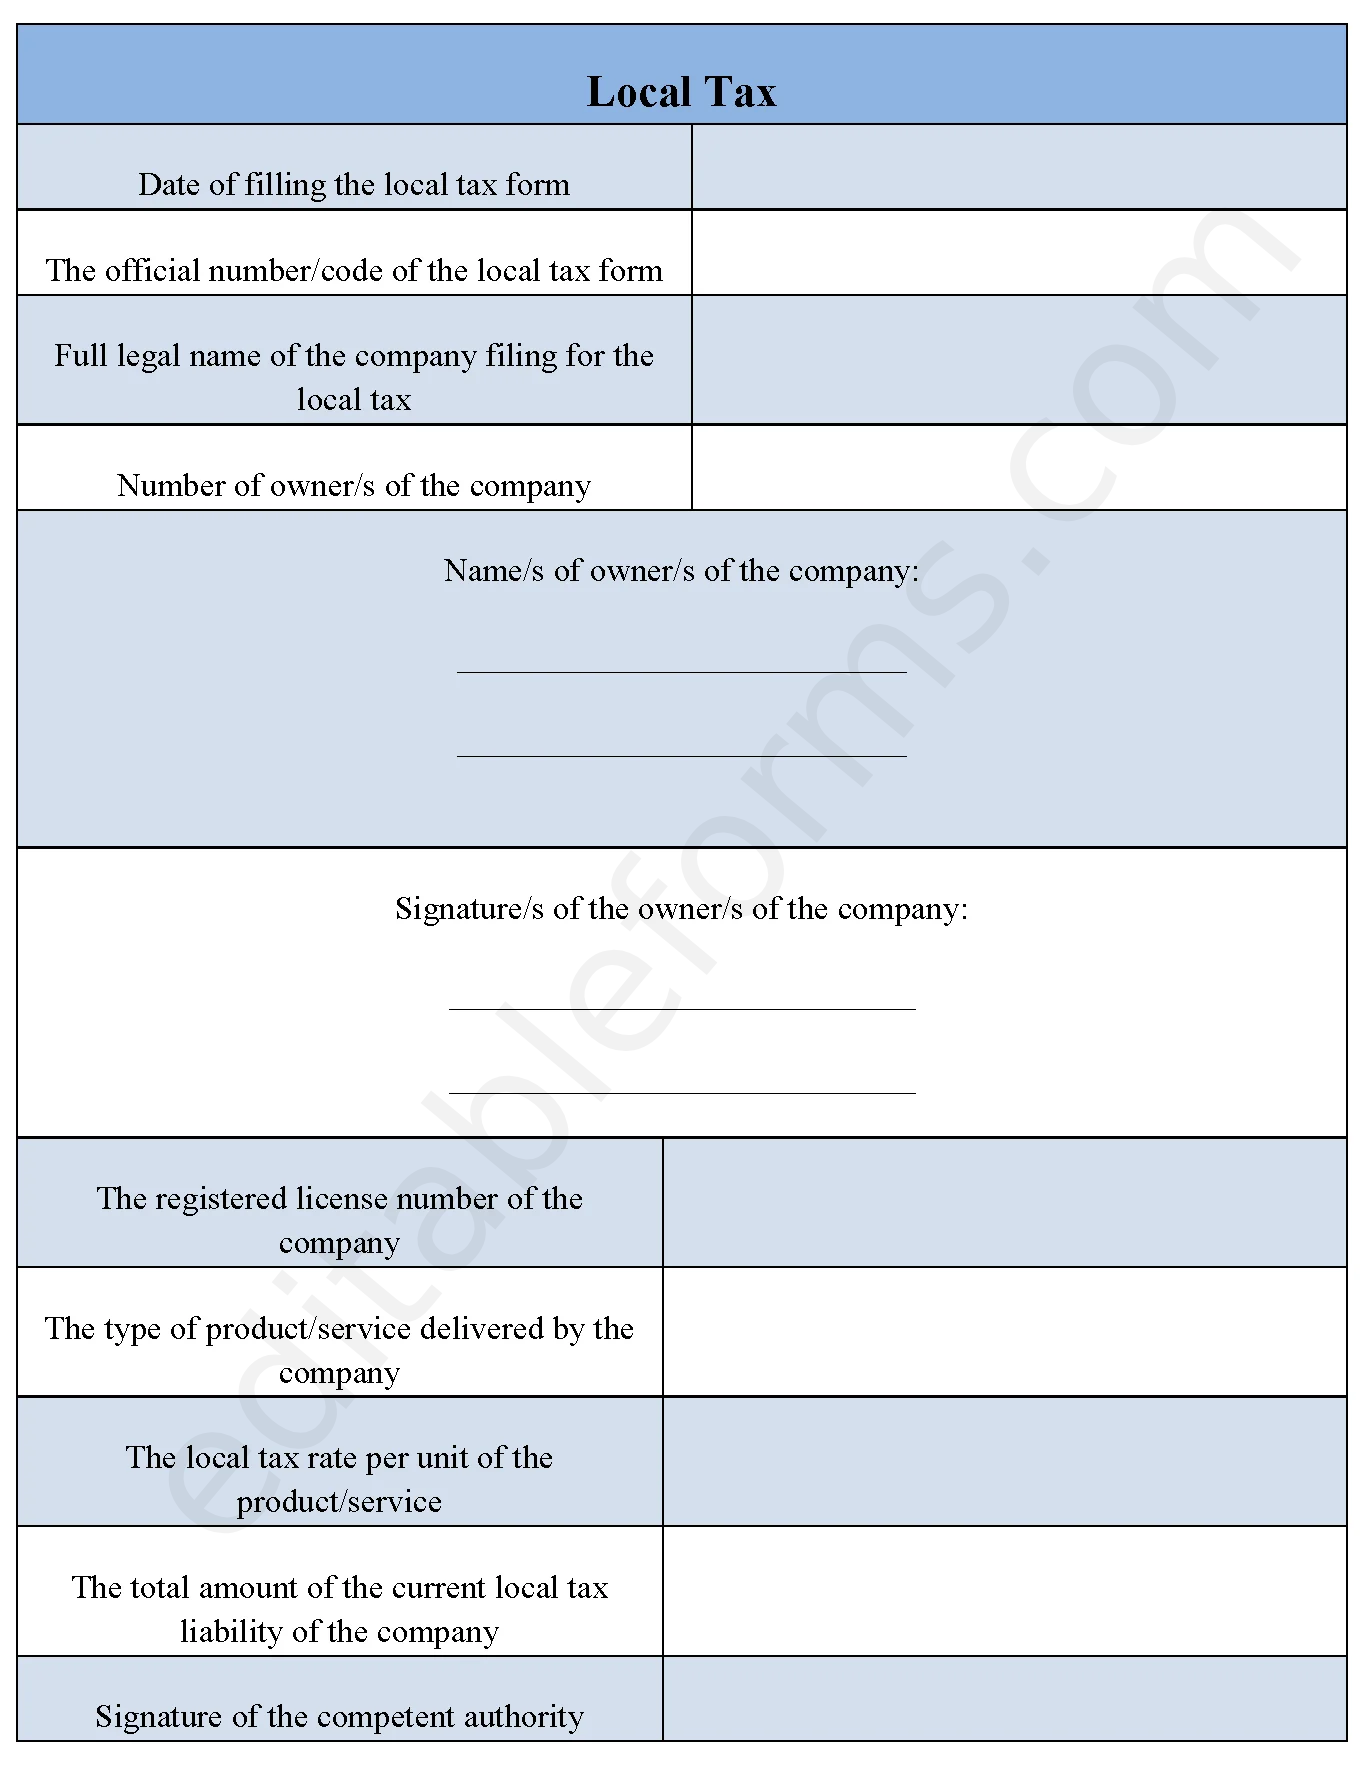 Local Tax Fillable PDF Template